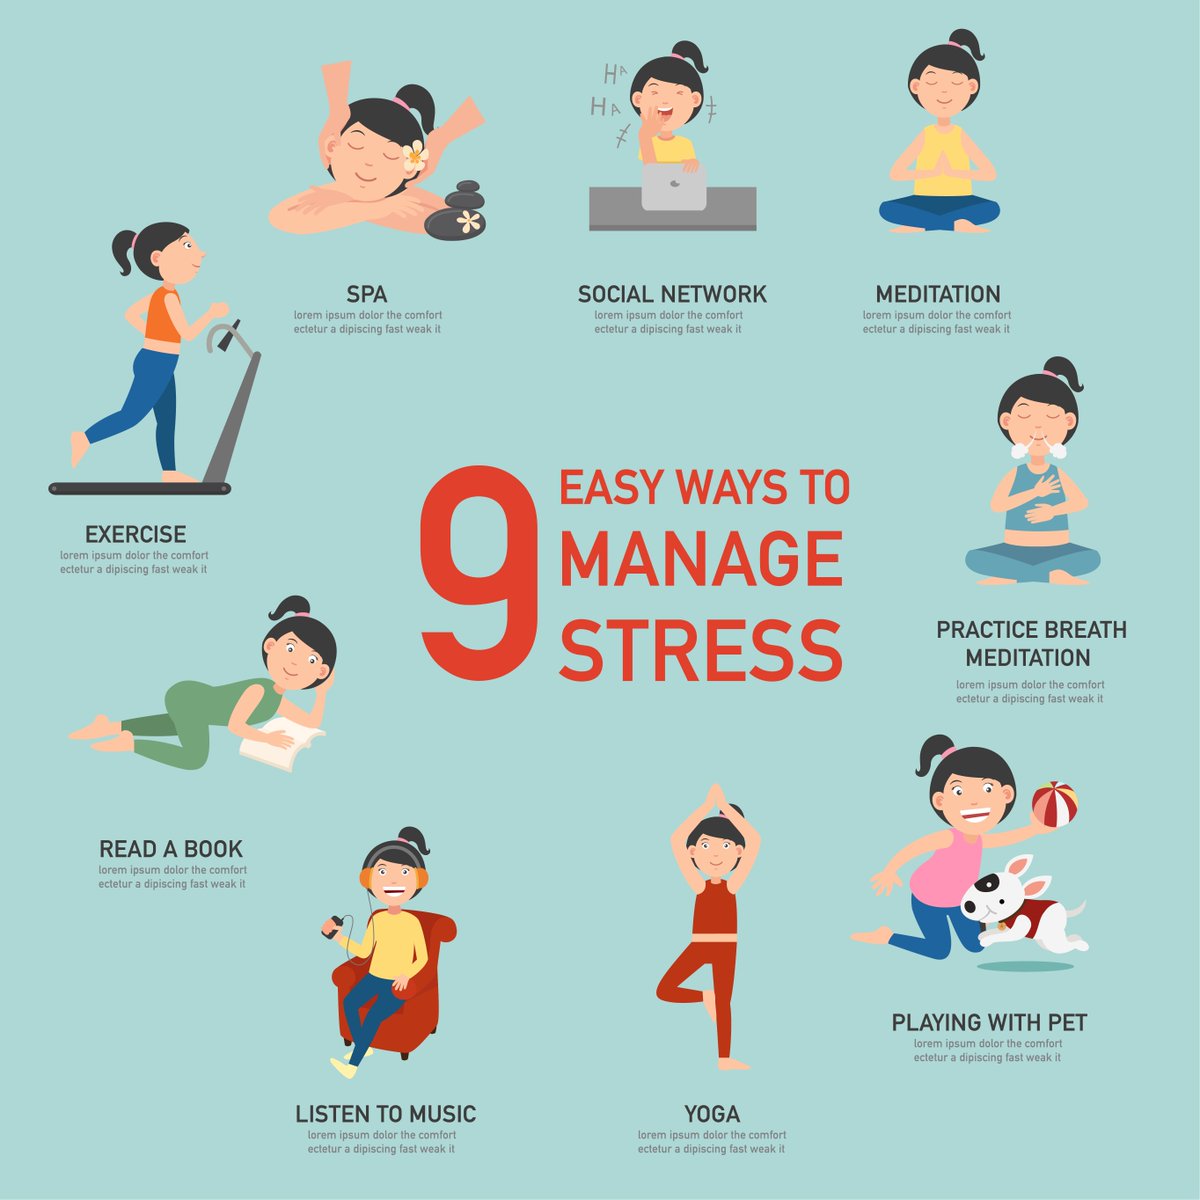 11 Ways to De-Stress From the Pressure of Working While In College